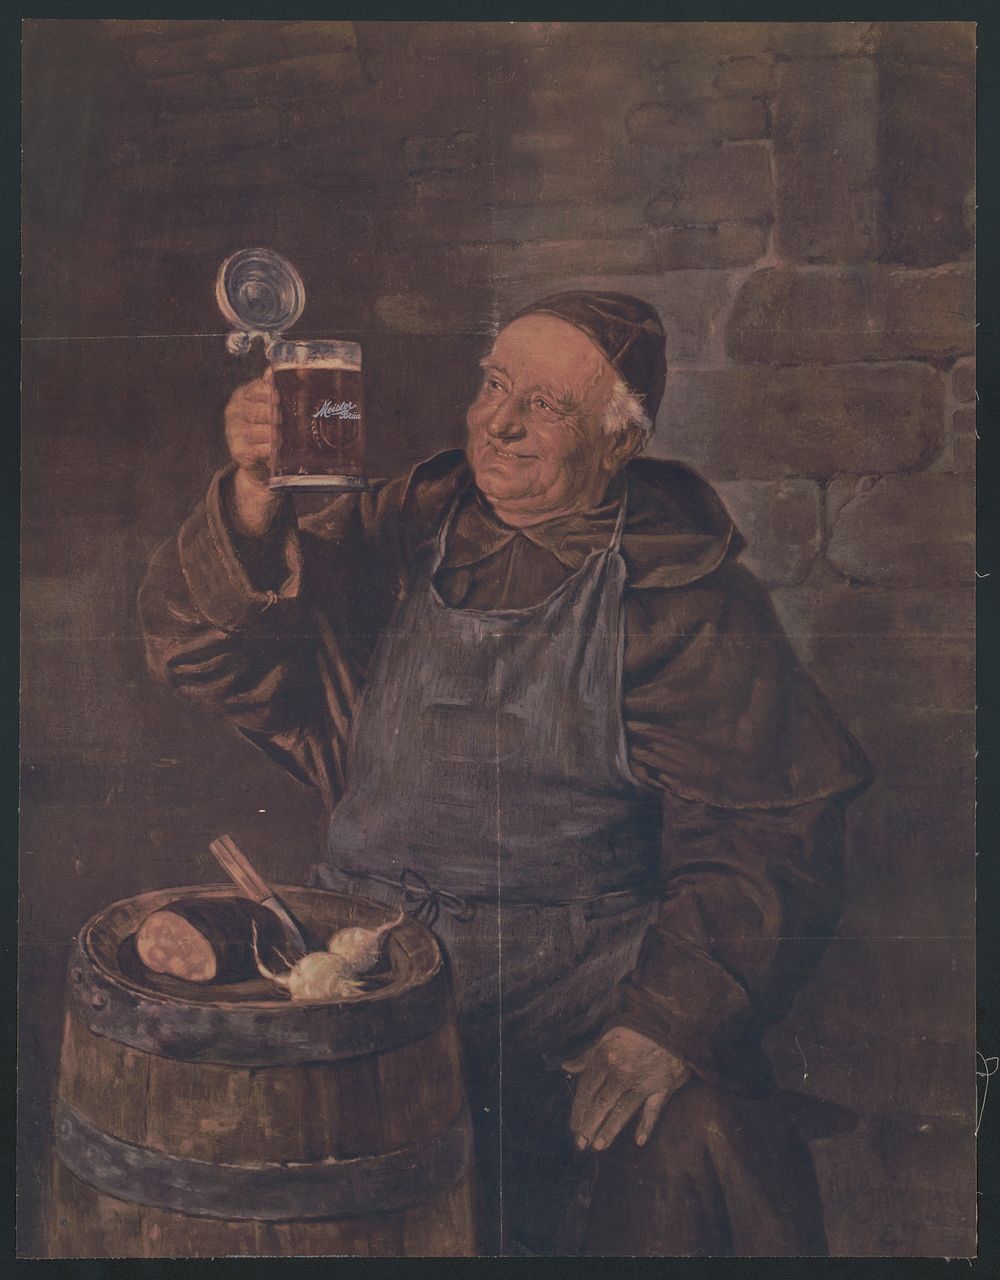 [Elderly man eating and drinking]